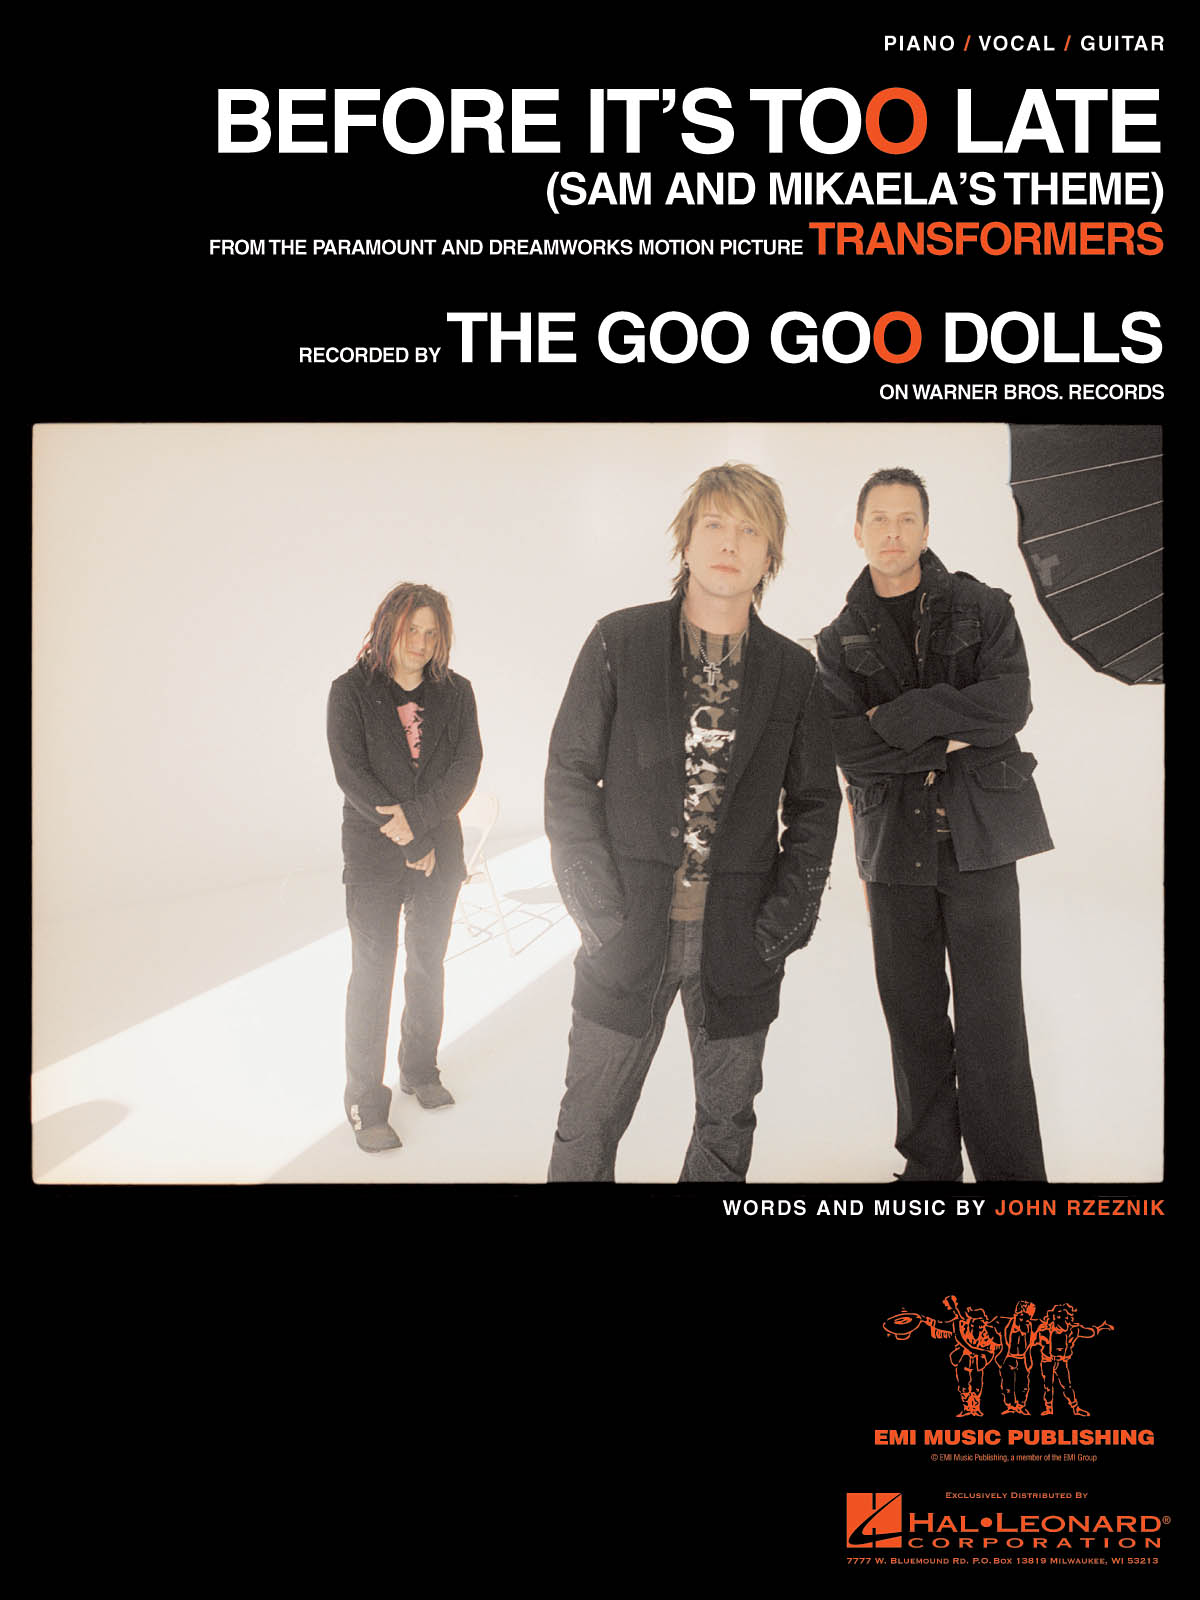 The Goo Goo Dolls: Before It's Too Late (from Transformers): Piano  Vocal and